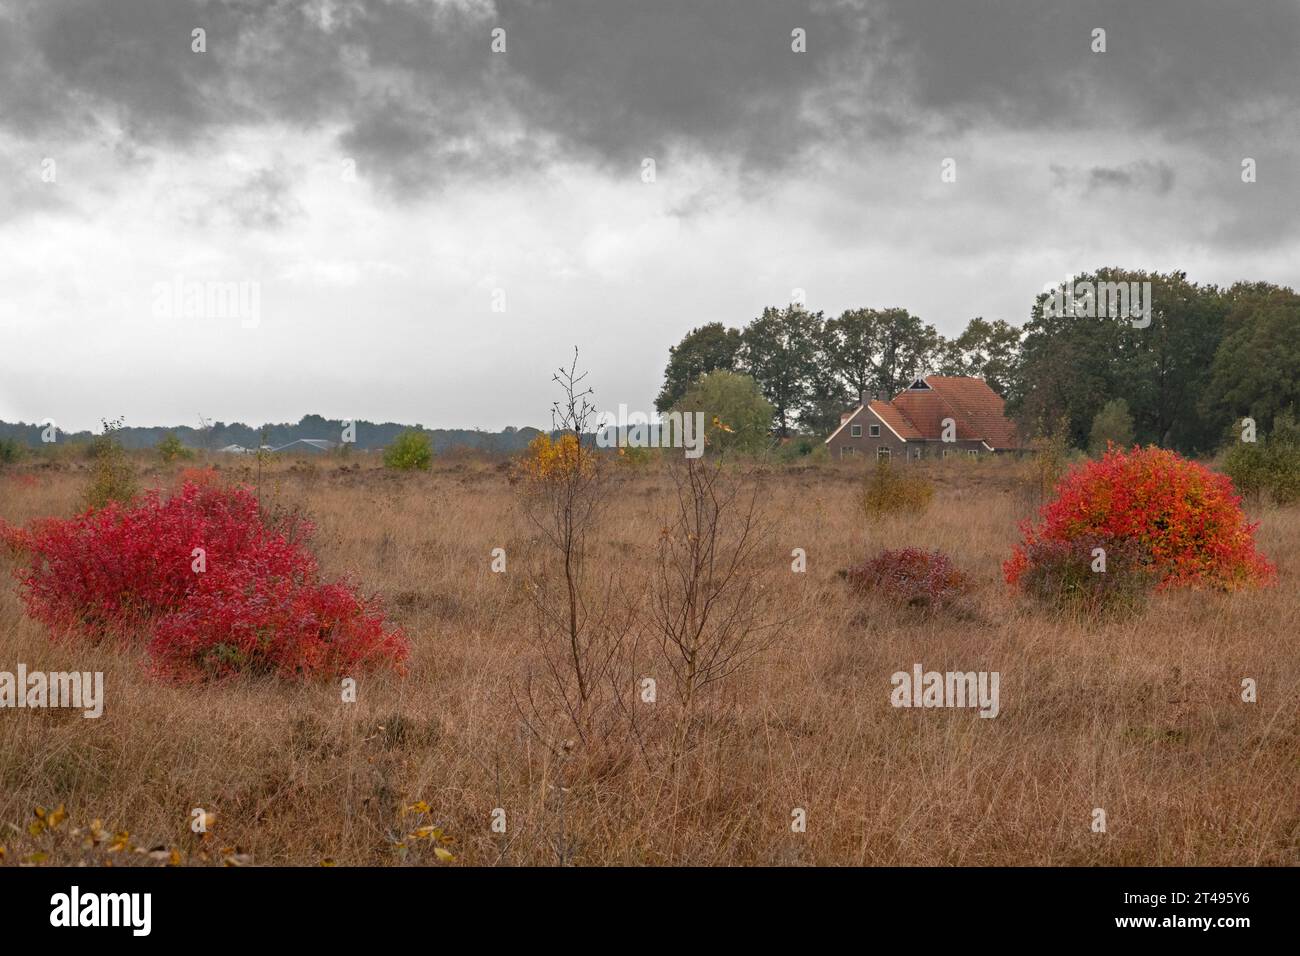 Northern highbush blueberry bushes, bright red leavesin autumn, in grassed heathland, in the background a farm with red roof tiles Stock Photo